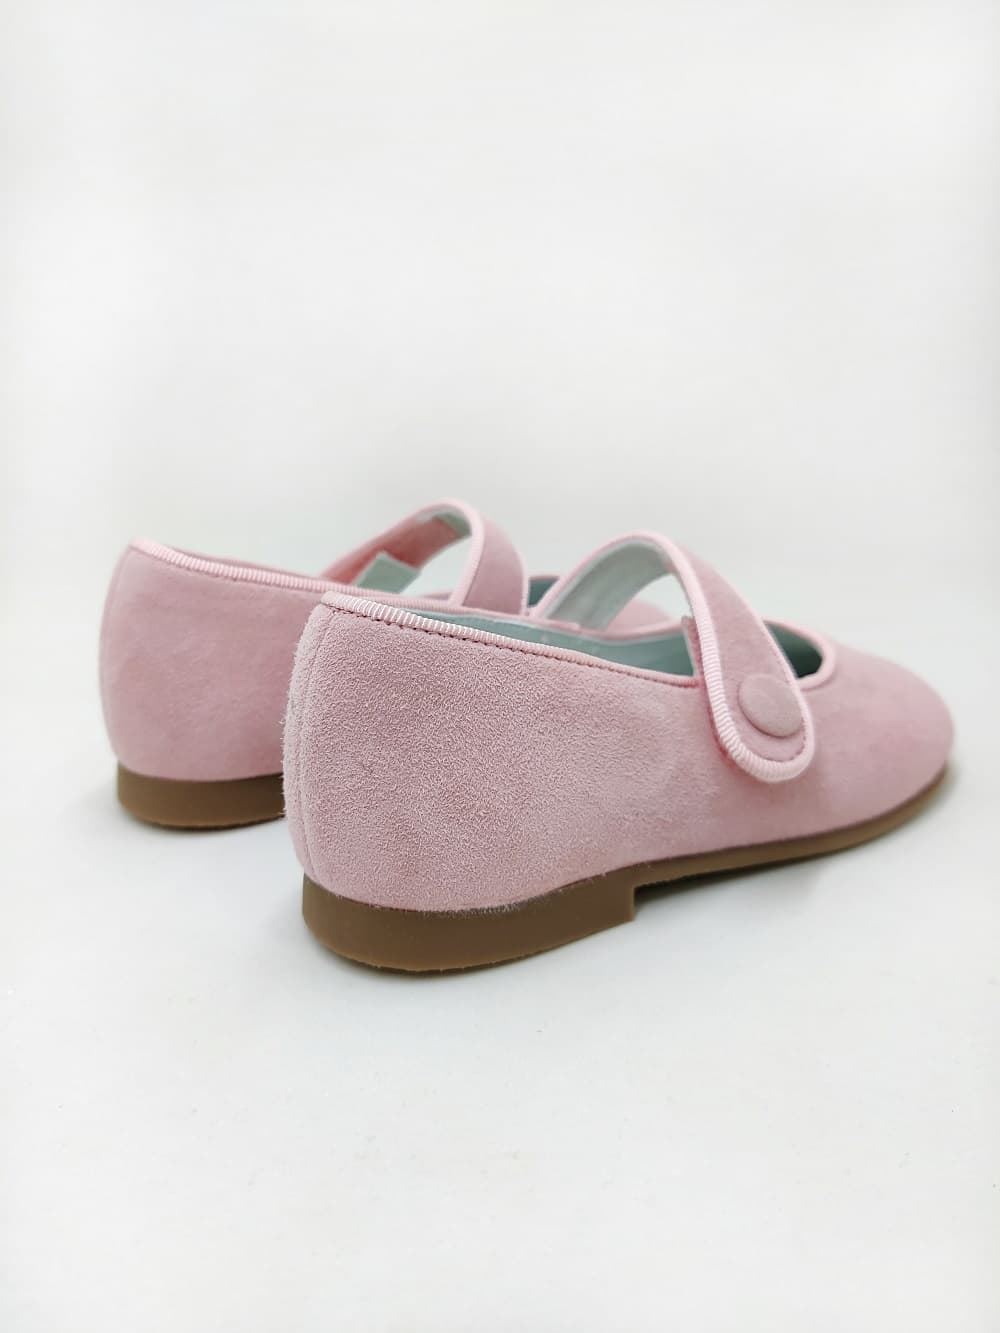 Pirufin (Piruflex) Mary Janes for baby girls in Pink suede - Image 3